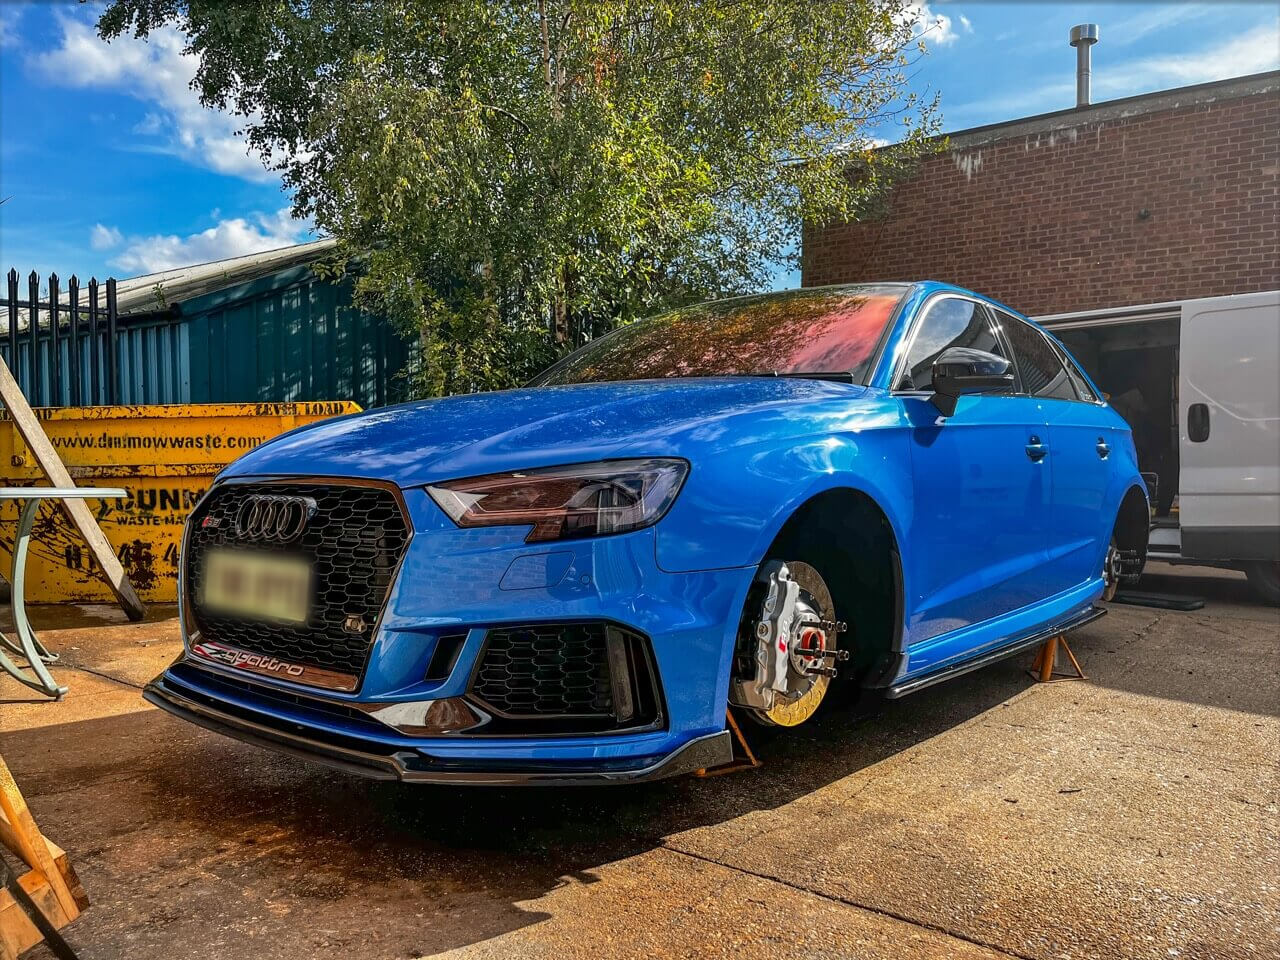 Rolling Rims Audi RS3 on jack stands after having a full detailed wash